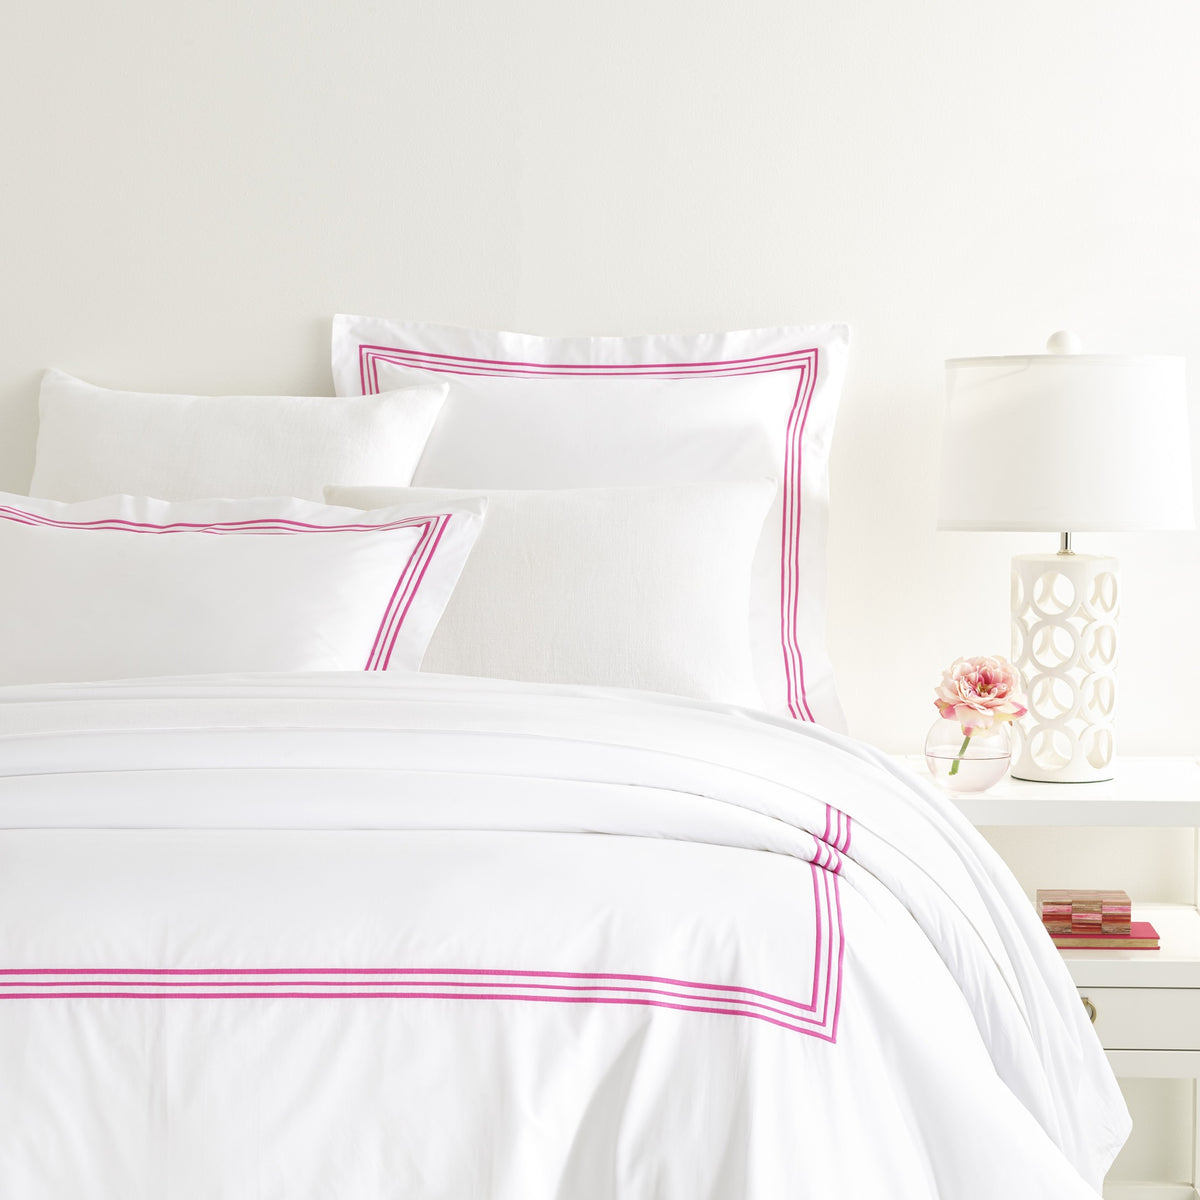 Duvet Cover of Pine Cone Hill Trio in Bed with Shams in Color Fuchsia